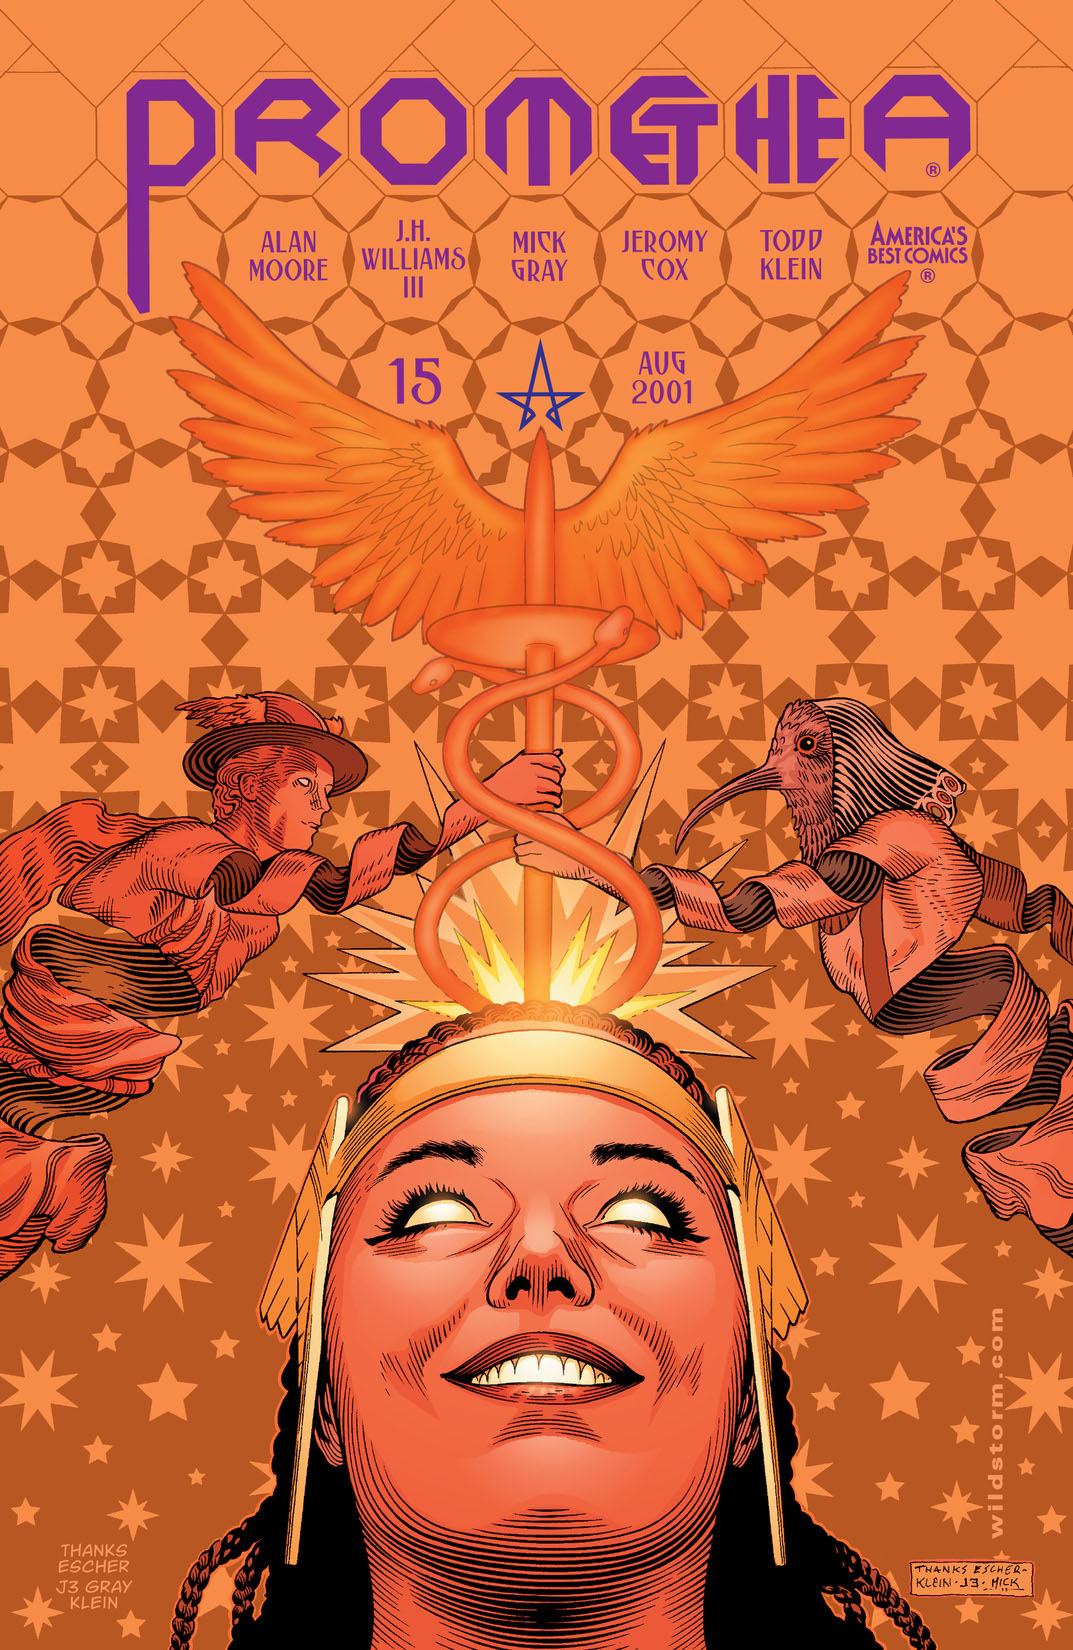 Promethea #15 preview images